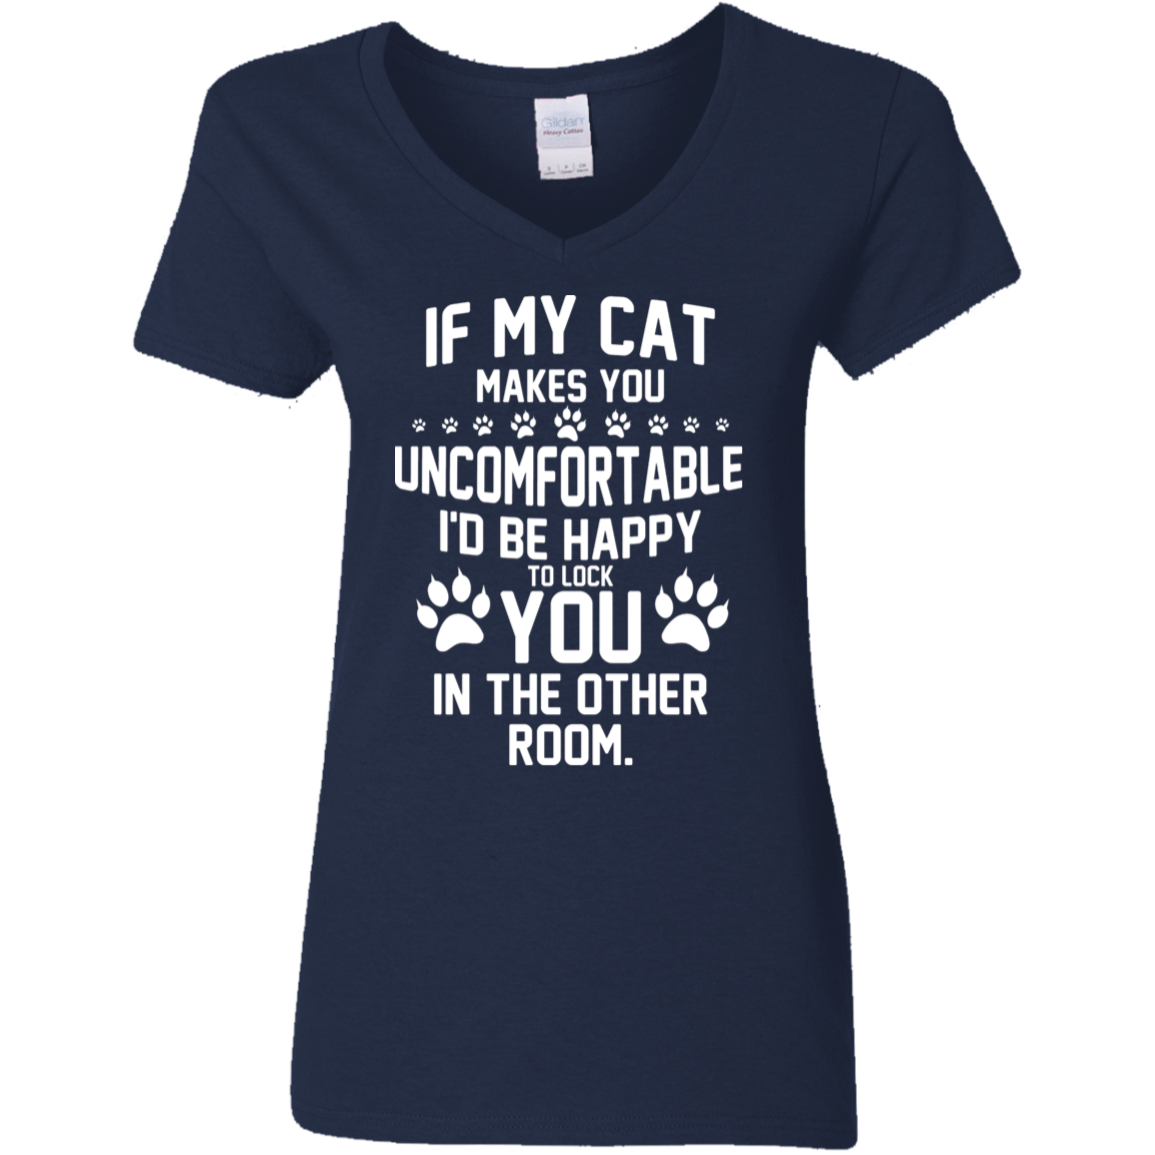 If My Cat Makes You Uncomfortable - Ladies V Neck.